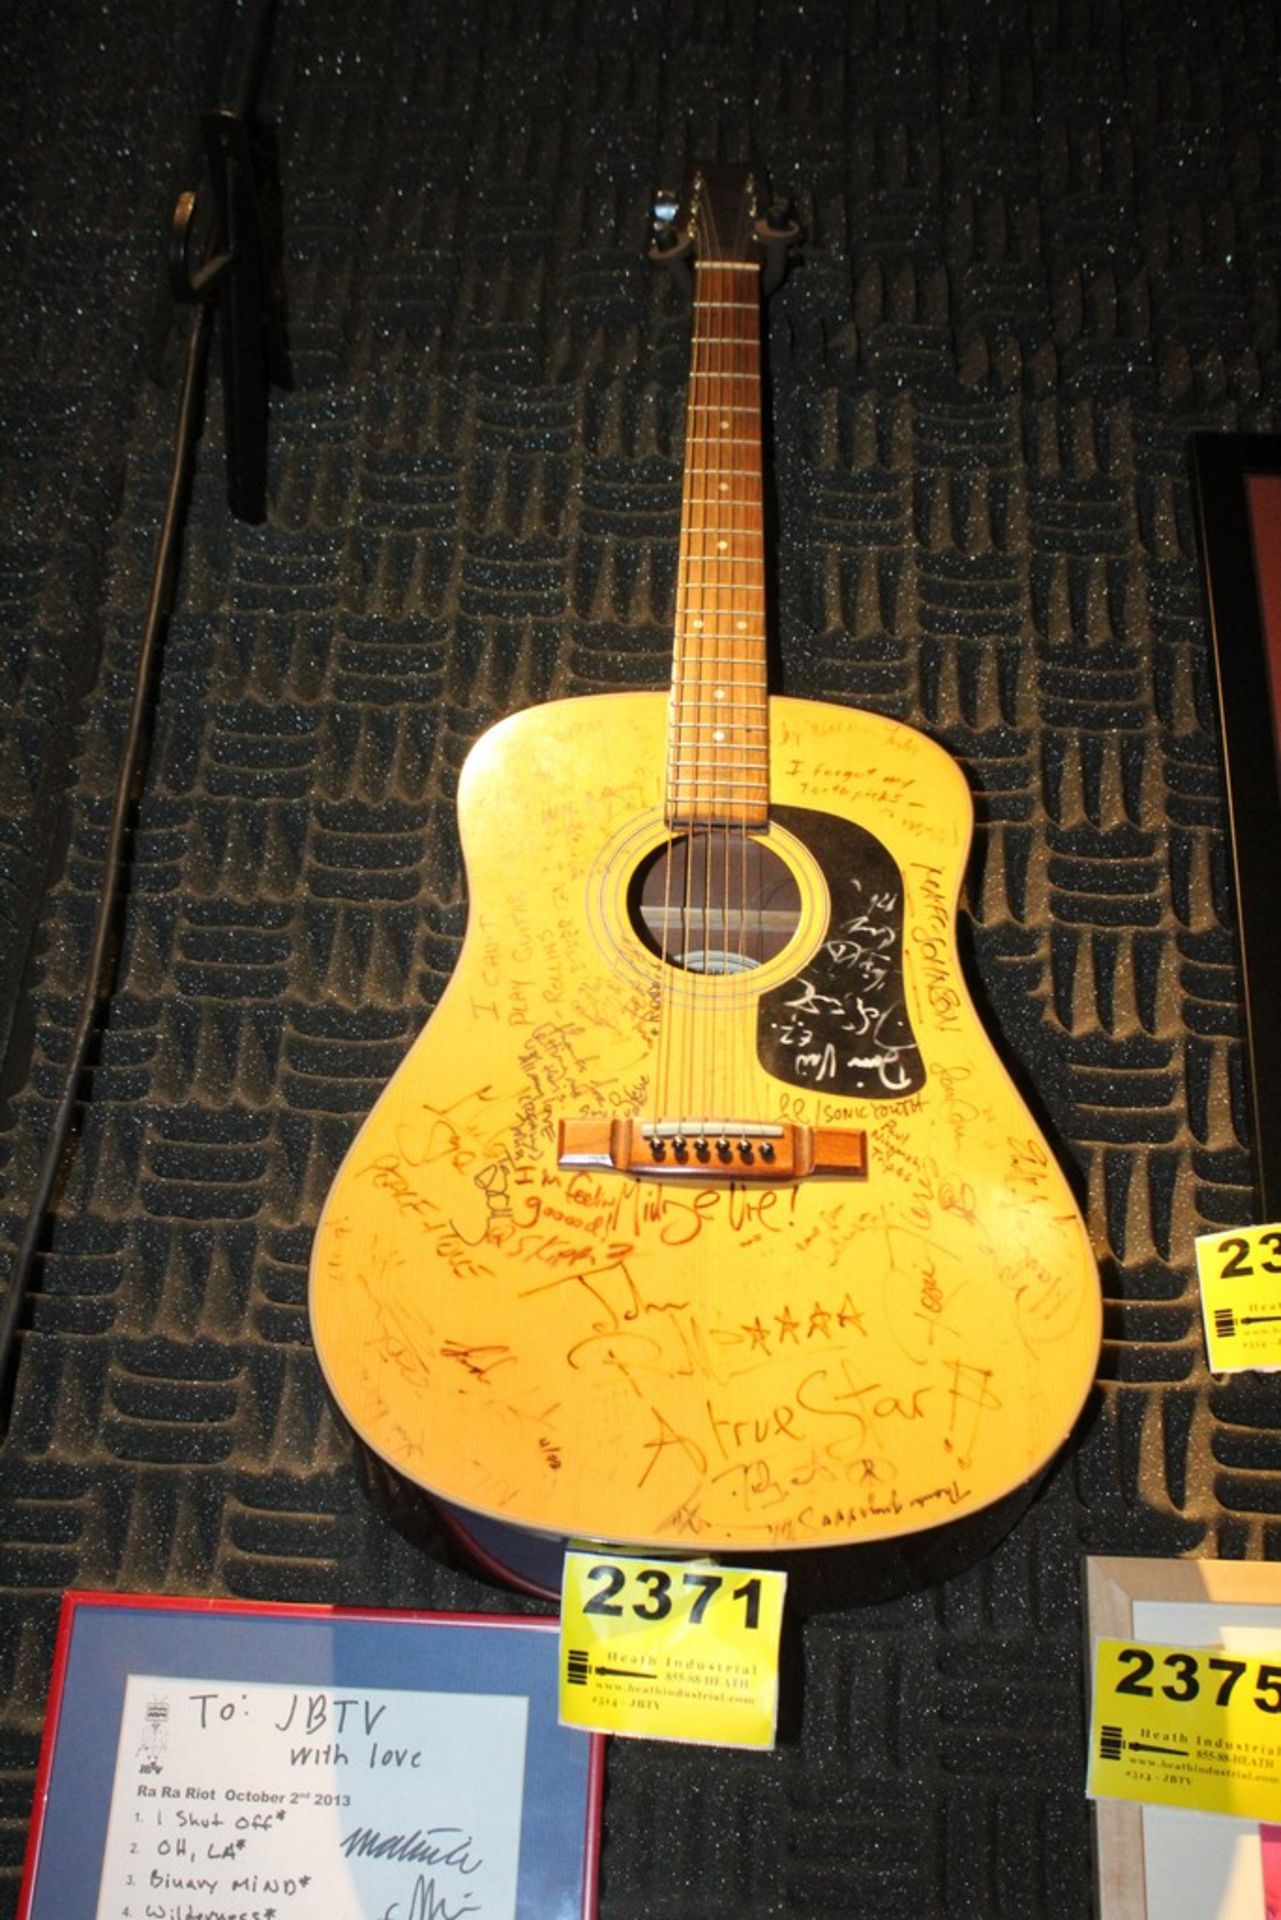 Signed Acoustic Guitar- Henry Rollins, Members of Sonic Youth, Members of Thin Lizzy